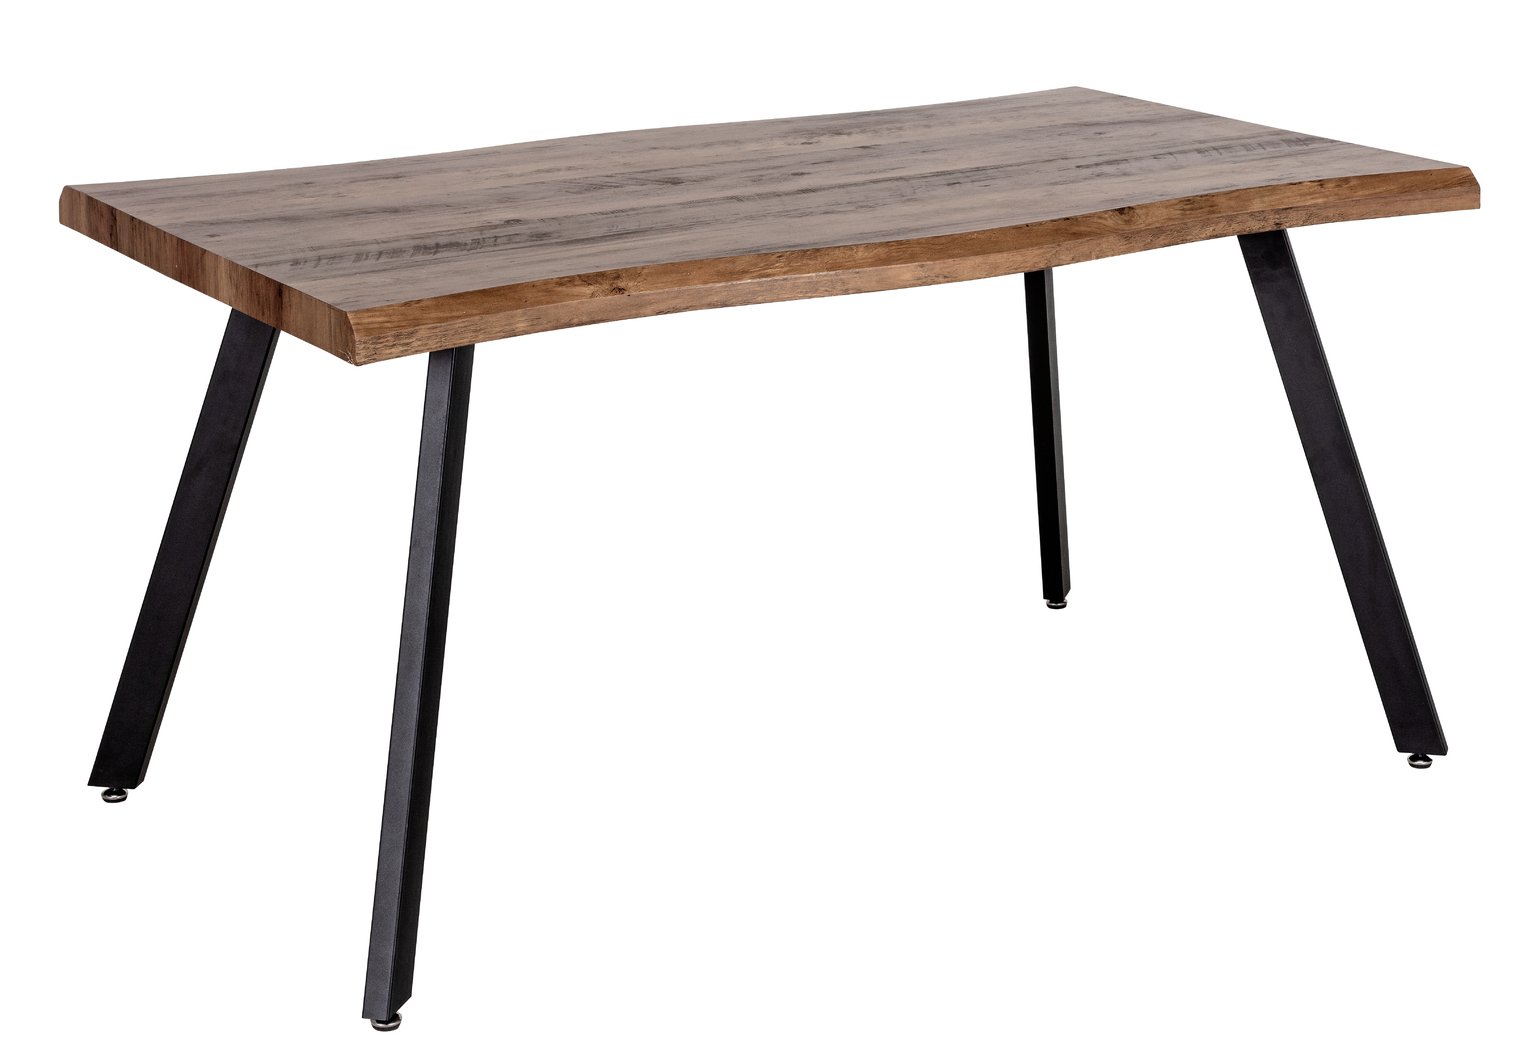 Argos Home Tribeca Wood Effect 4 Seater Dining Table